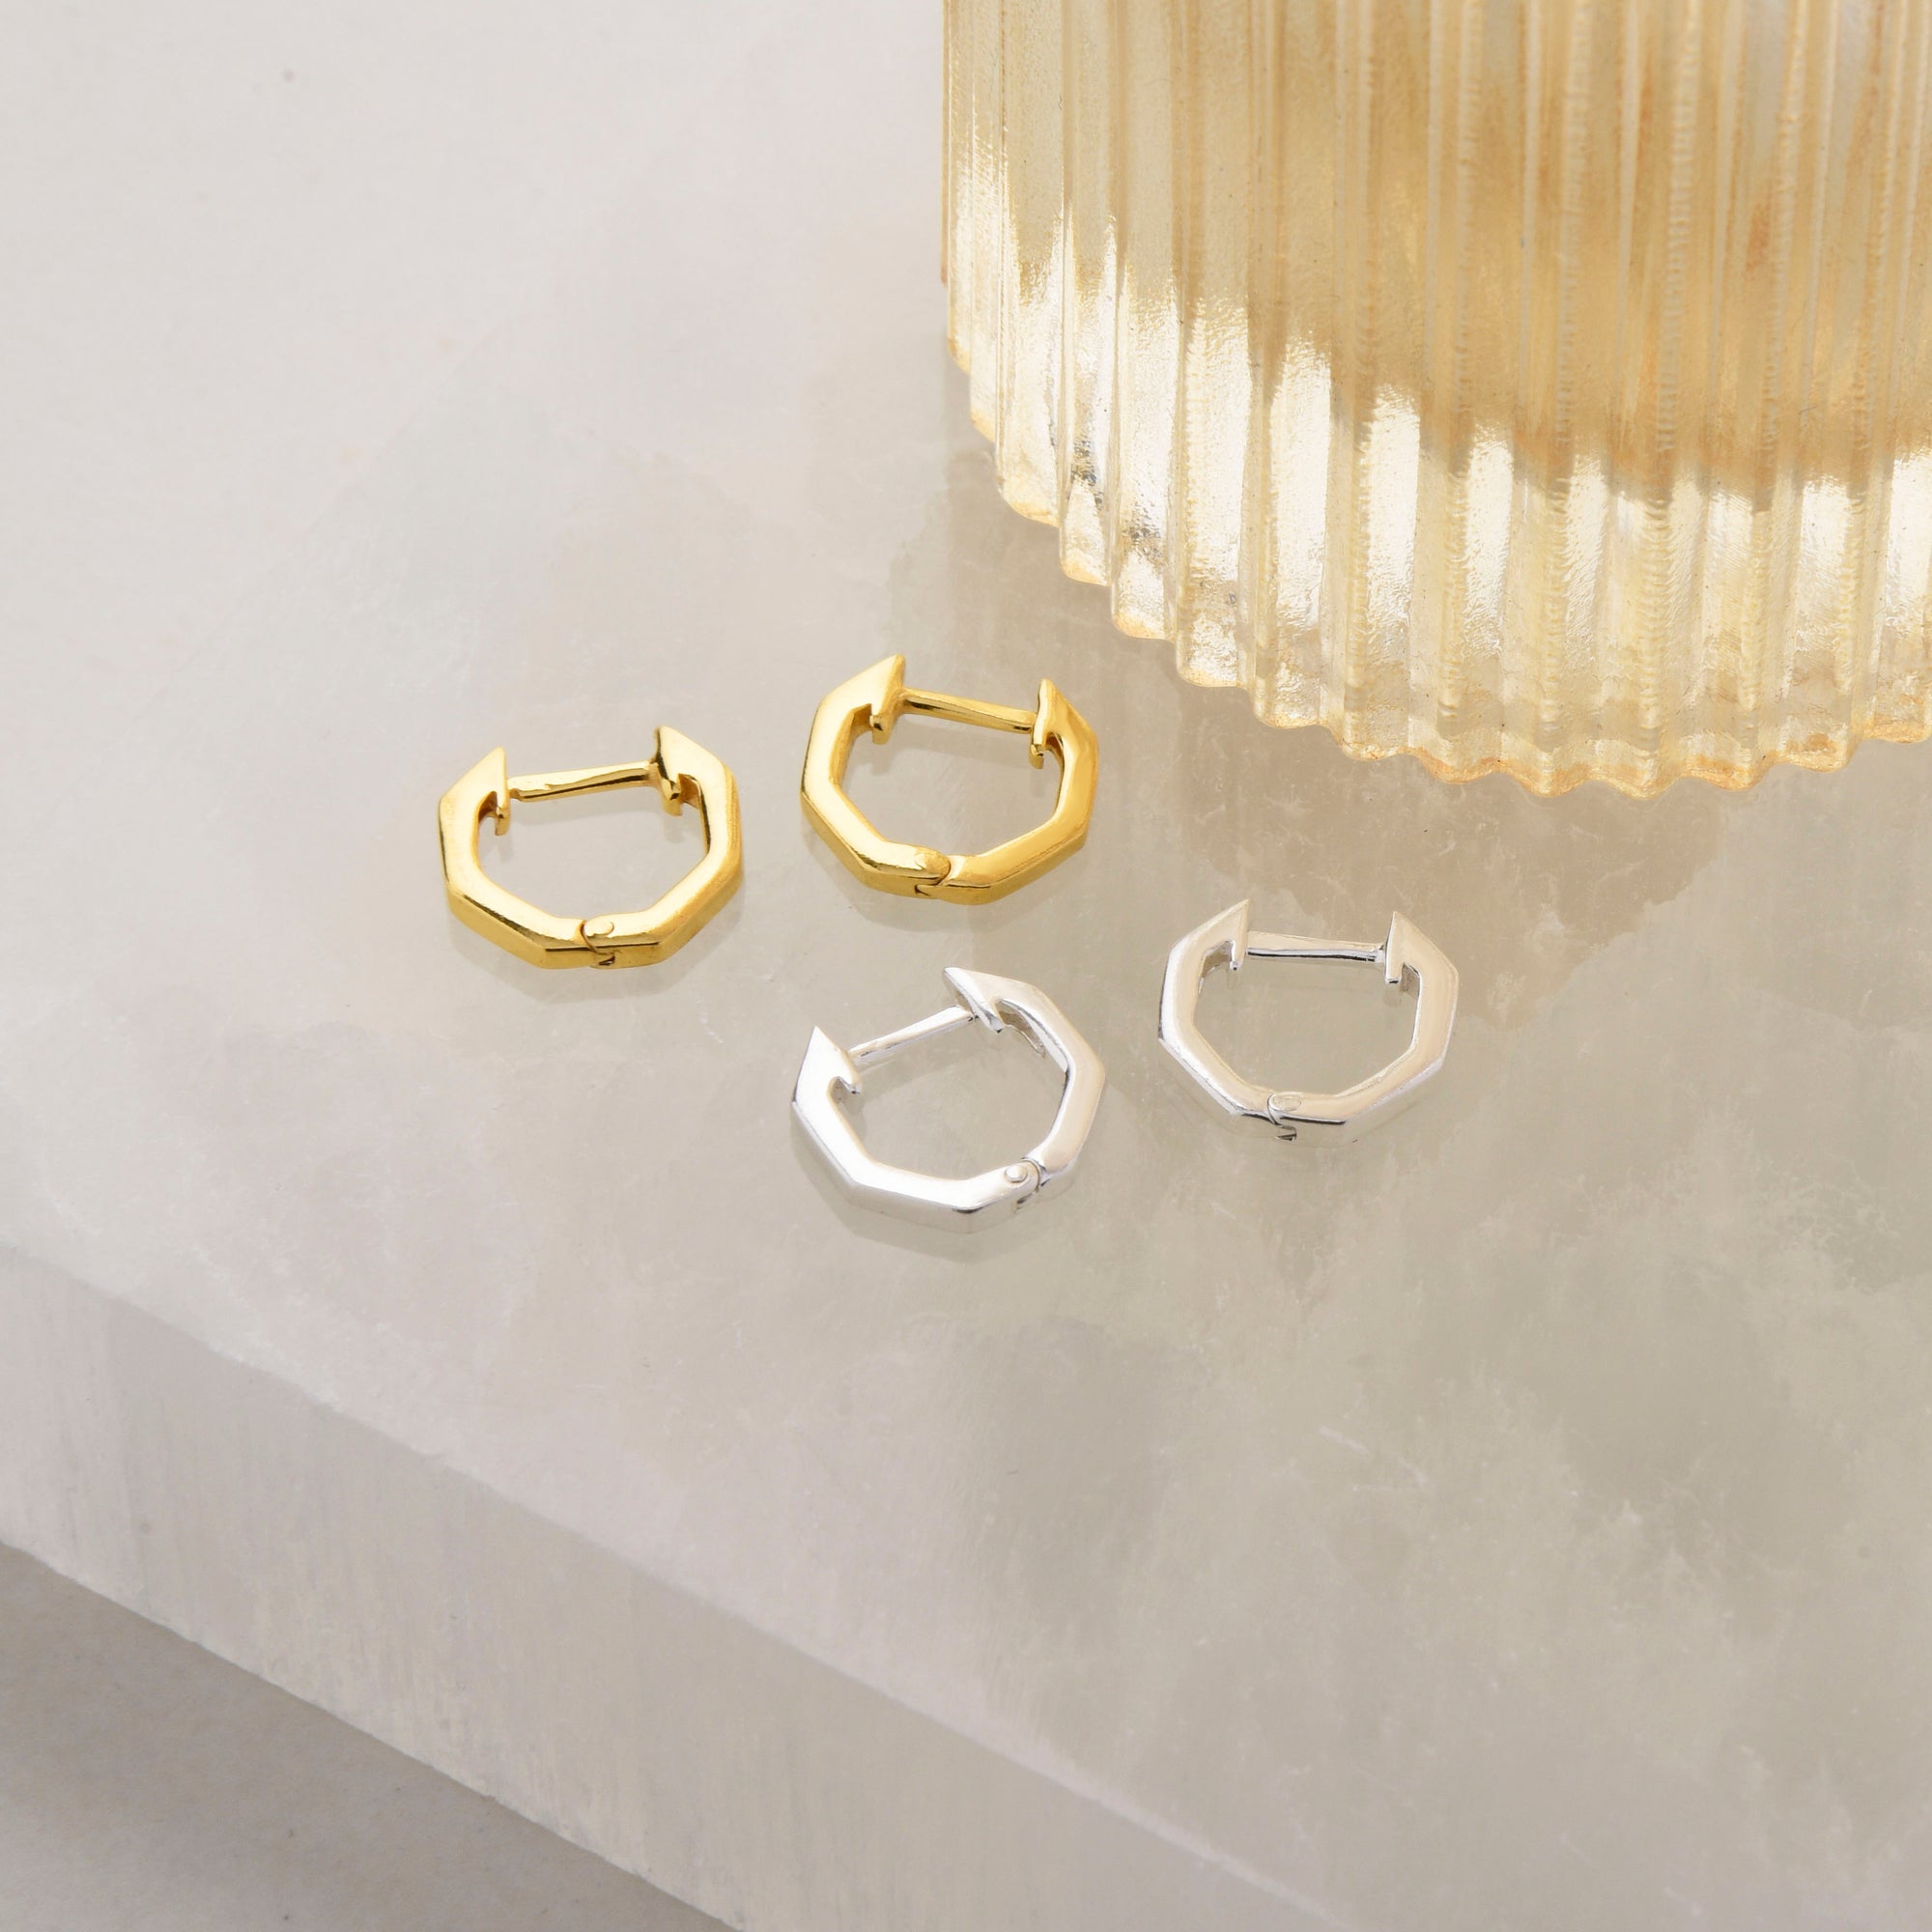 hexagon shaped ear hoops in silver and gold next to a vase